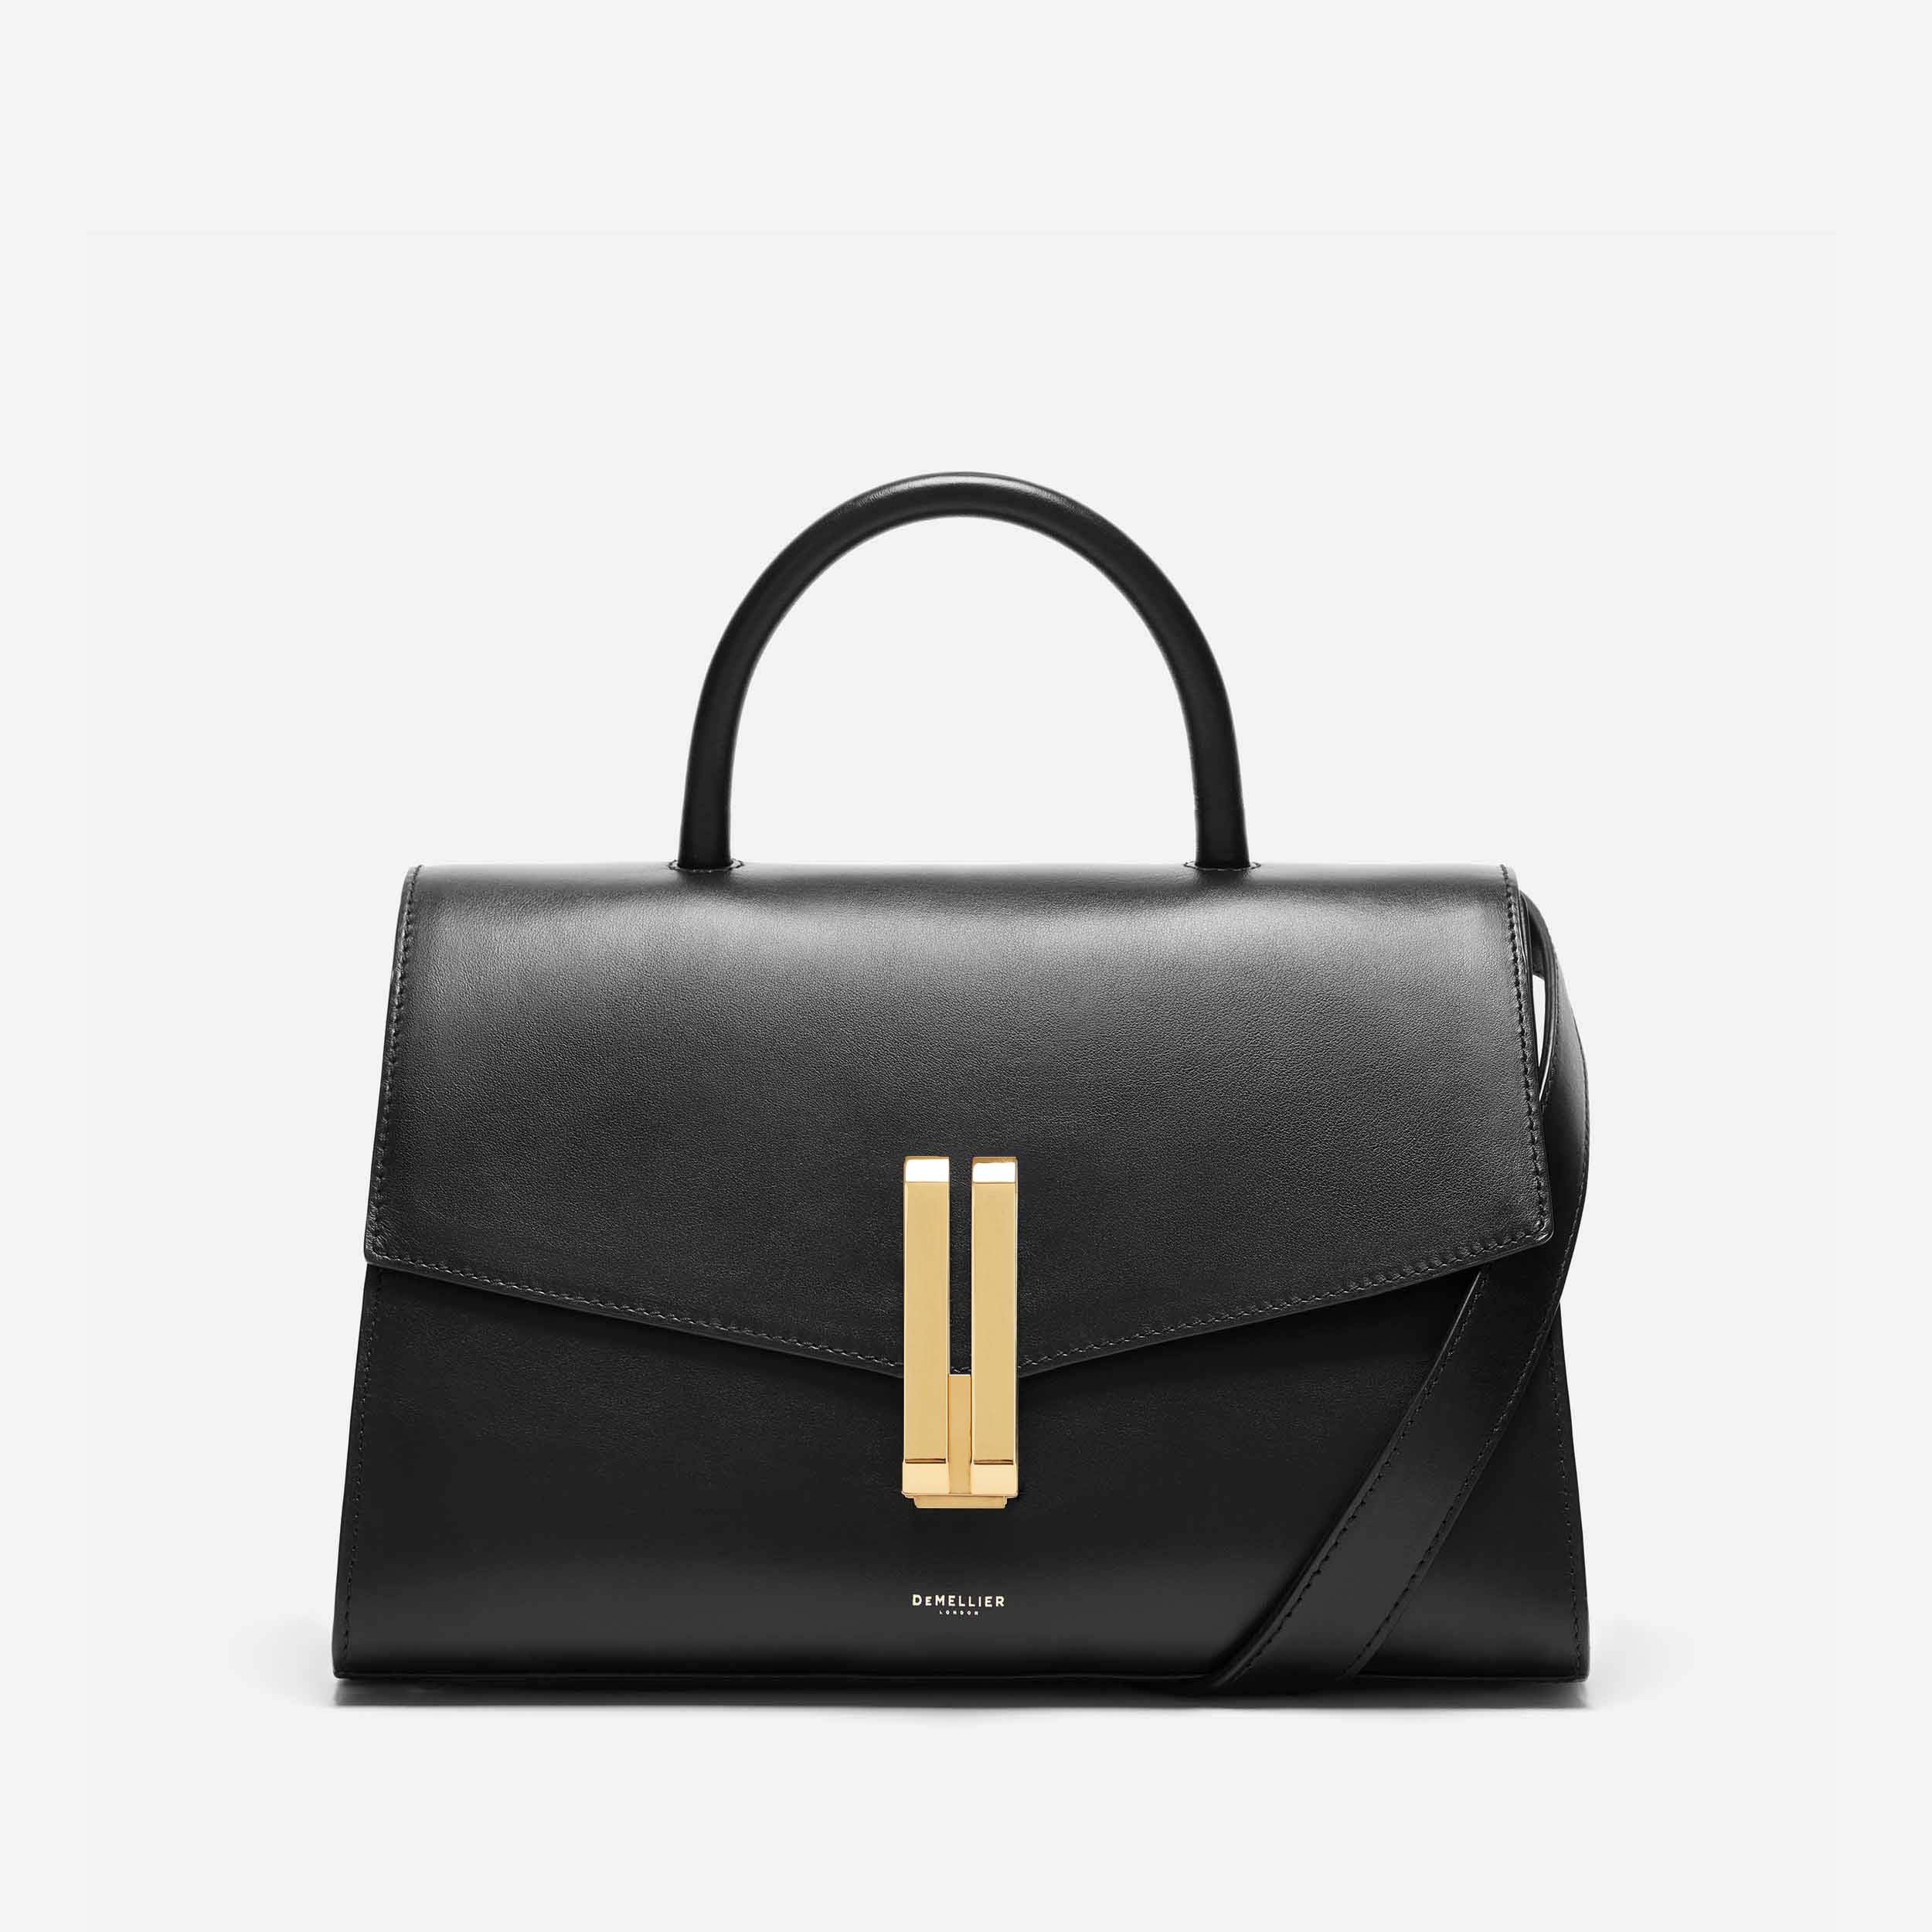 Hermes Kelly Alternative: Louis Vuitton Cluny BB Review and What Fits 